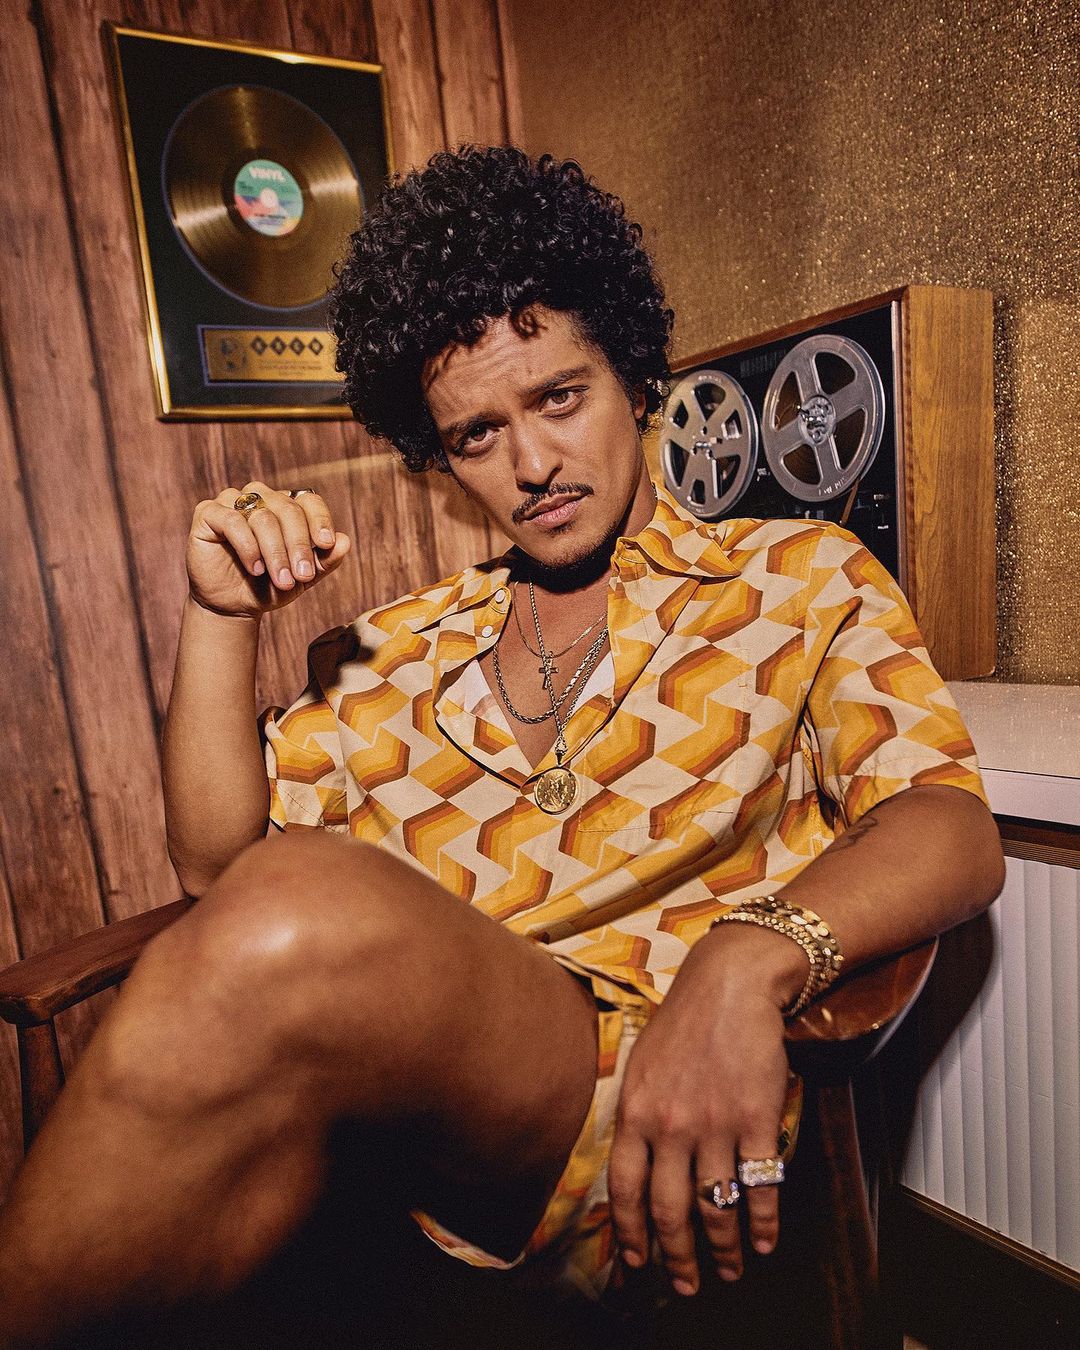 Bruno Mars music, videos, stats, and photos